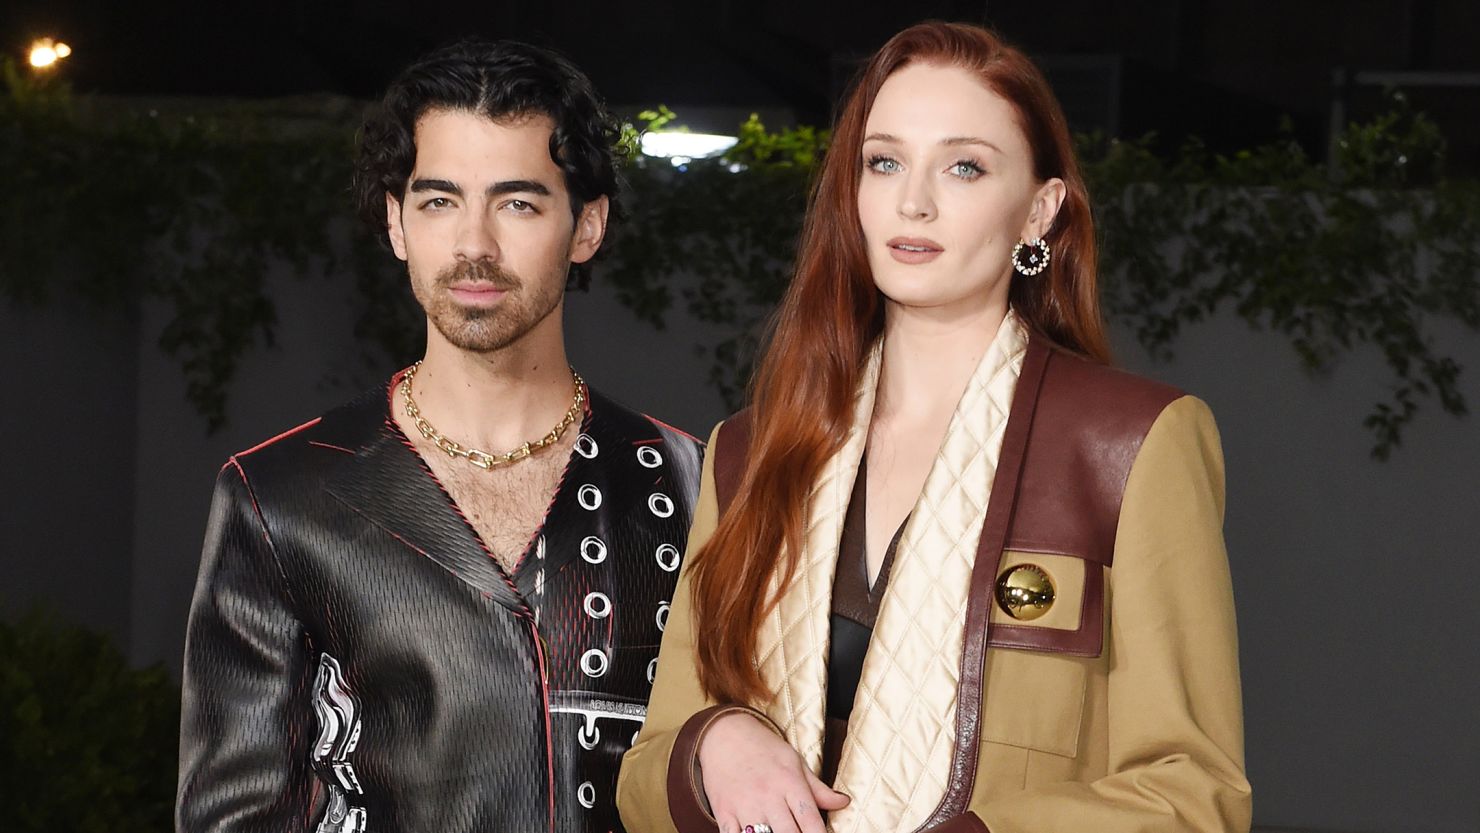 Joe Jonas and Sophie Turner attend the Second Annual Academy Museum Gala on October 15, 2022 in Los Angeles, California.